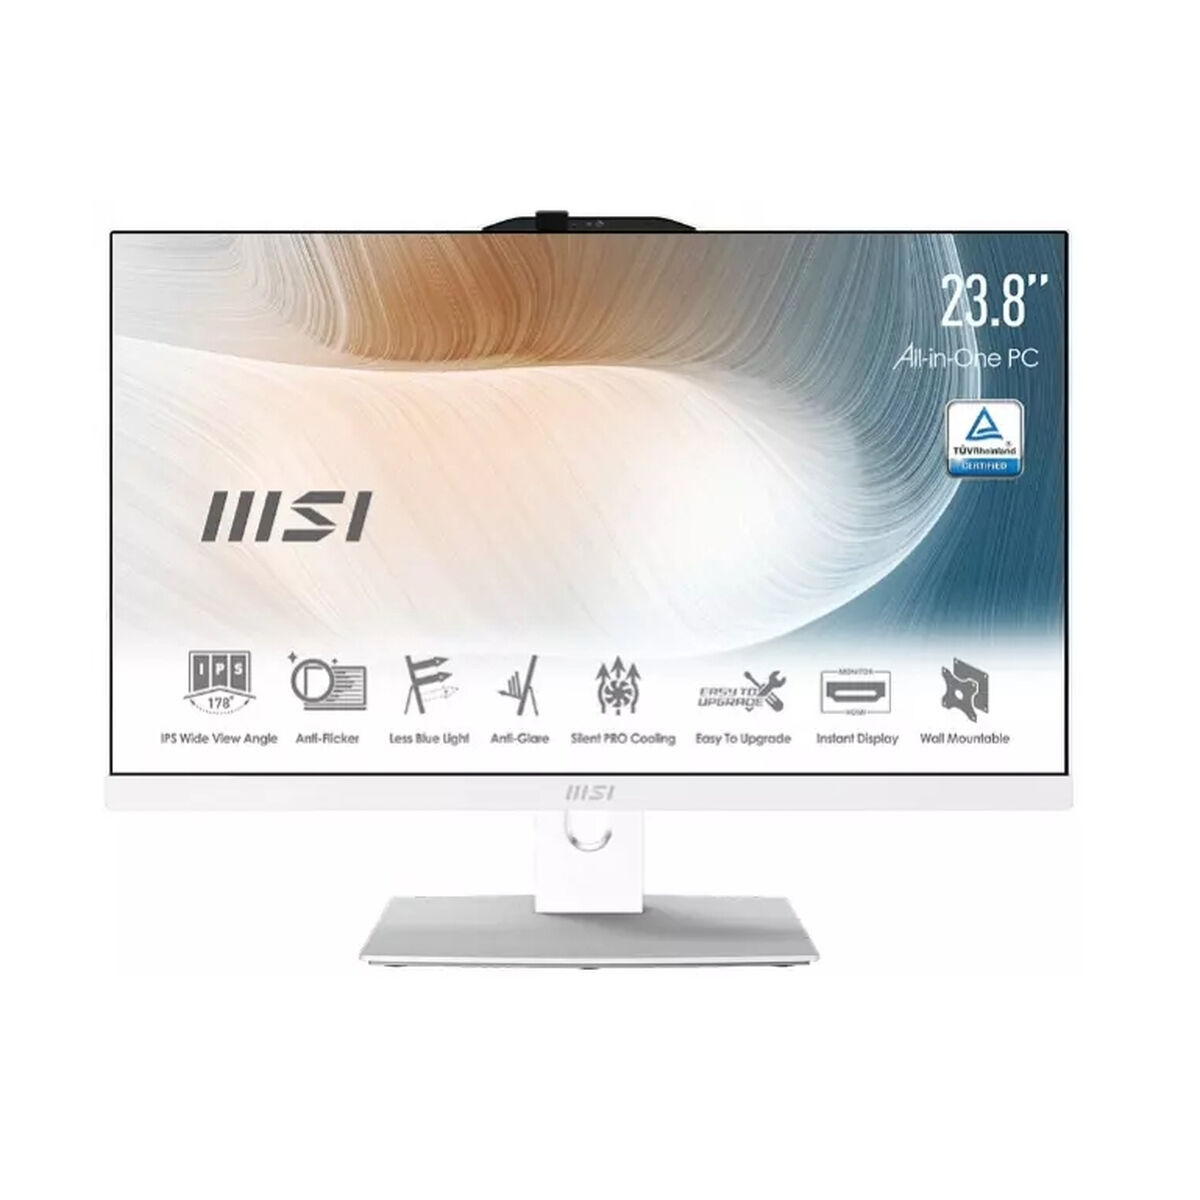 All in One MSI 9S6-AE0122-1005 16 GB 1 TB + 256 GB SSD 23.8"